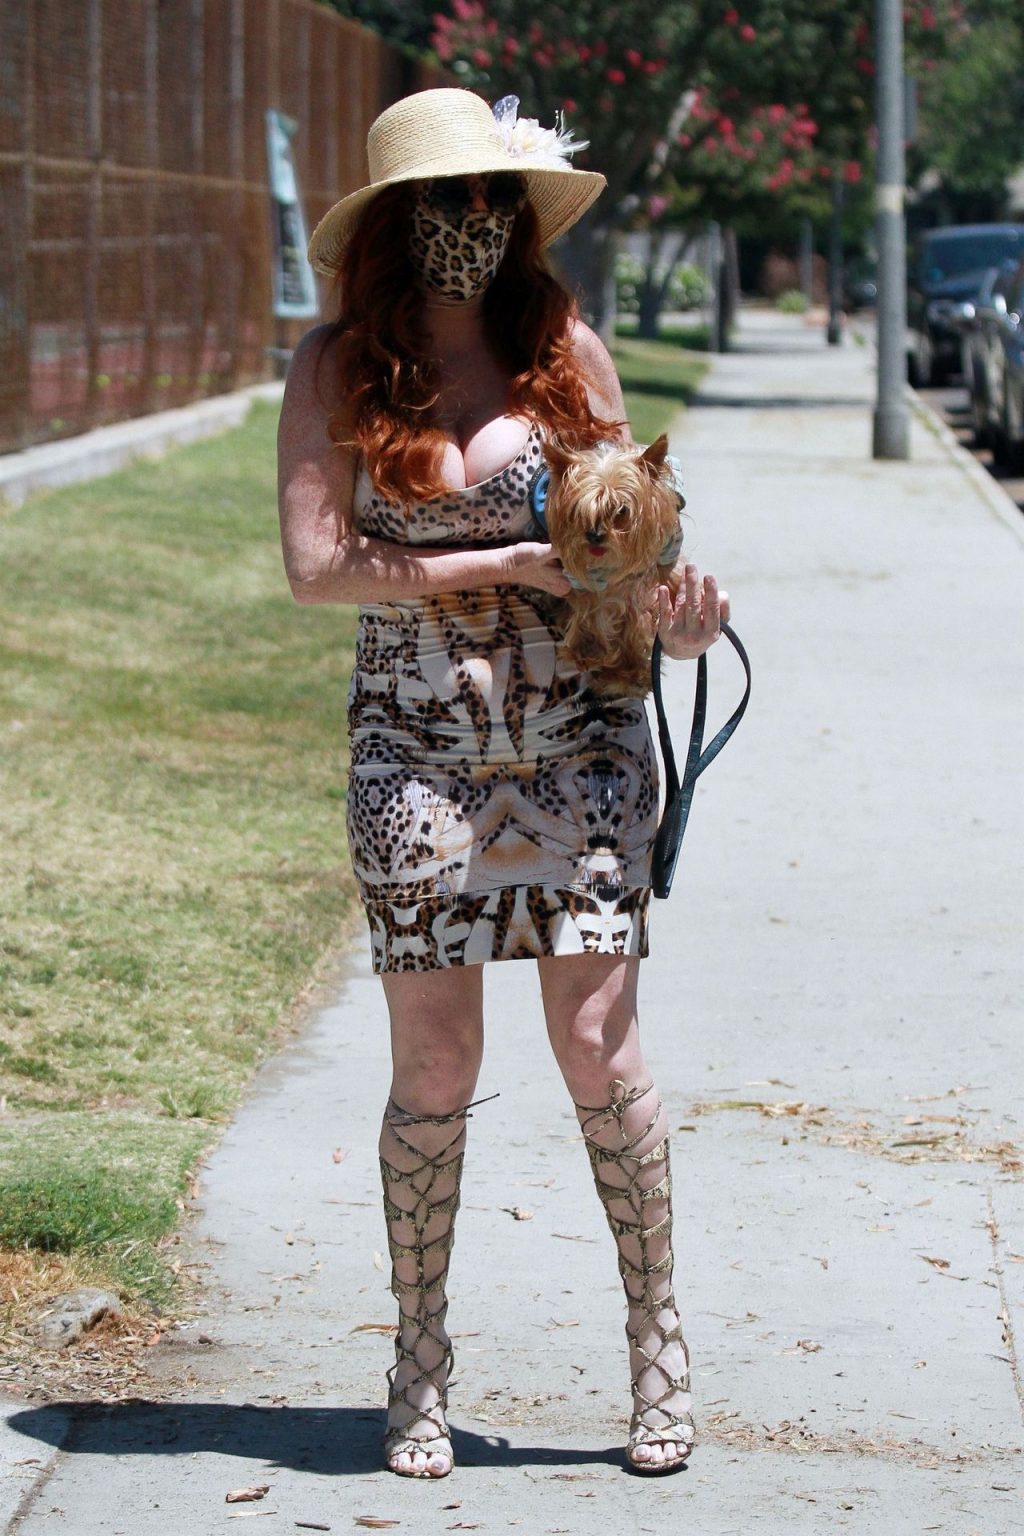 Phoebe Price Takes Her Pooch for a Walk in a Park (36 Photos)